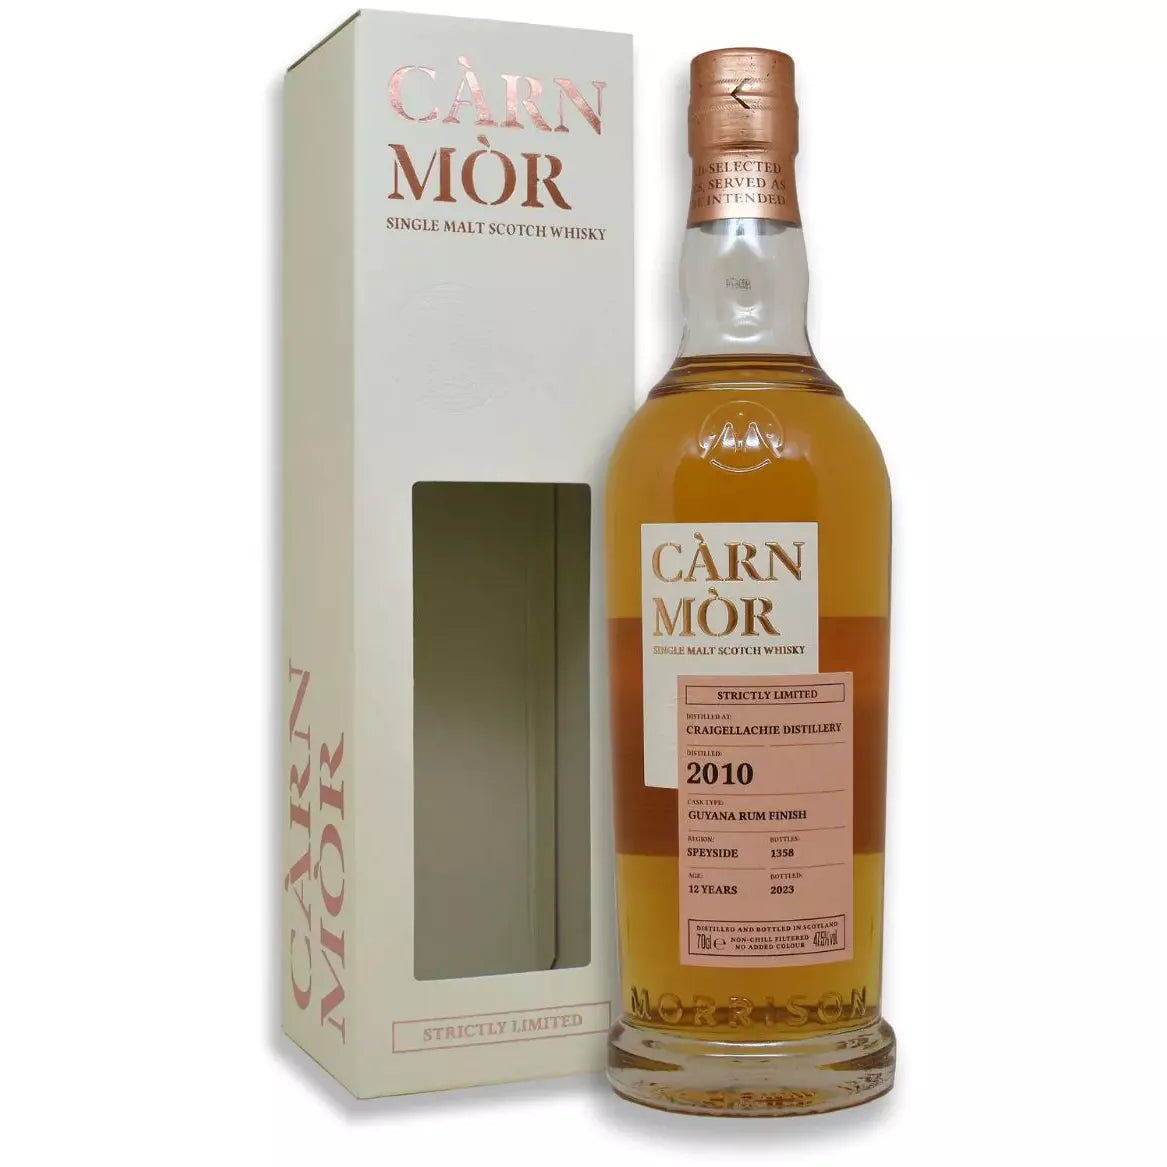 Craigellachie 13 Years Old Carn Mor Strictly Limited 2010